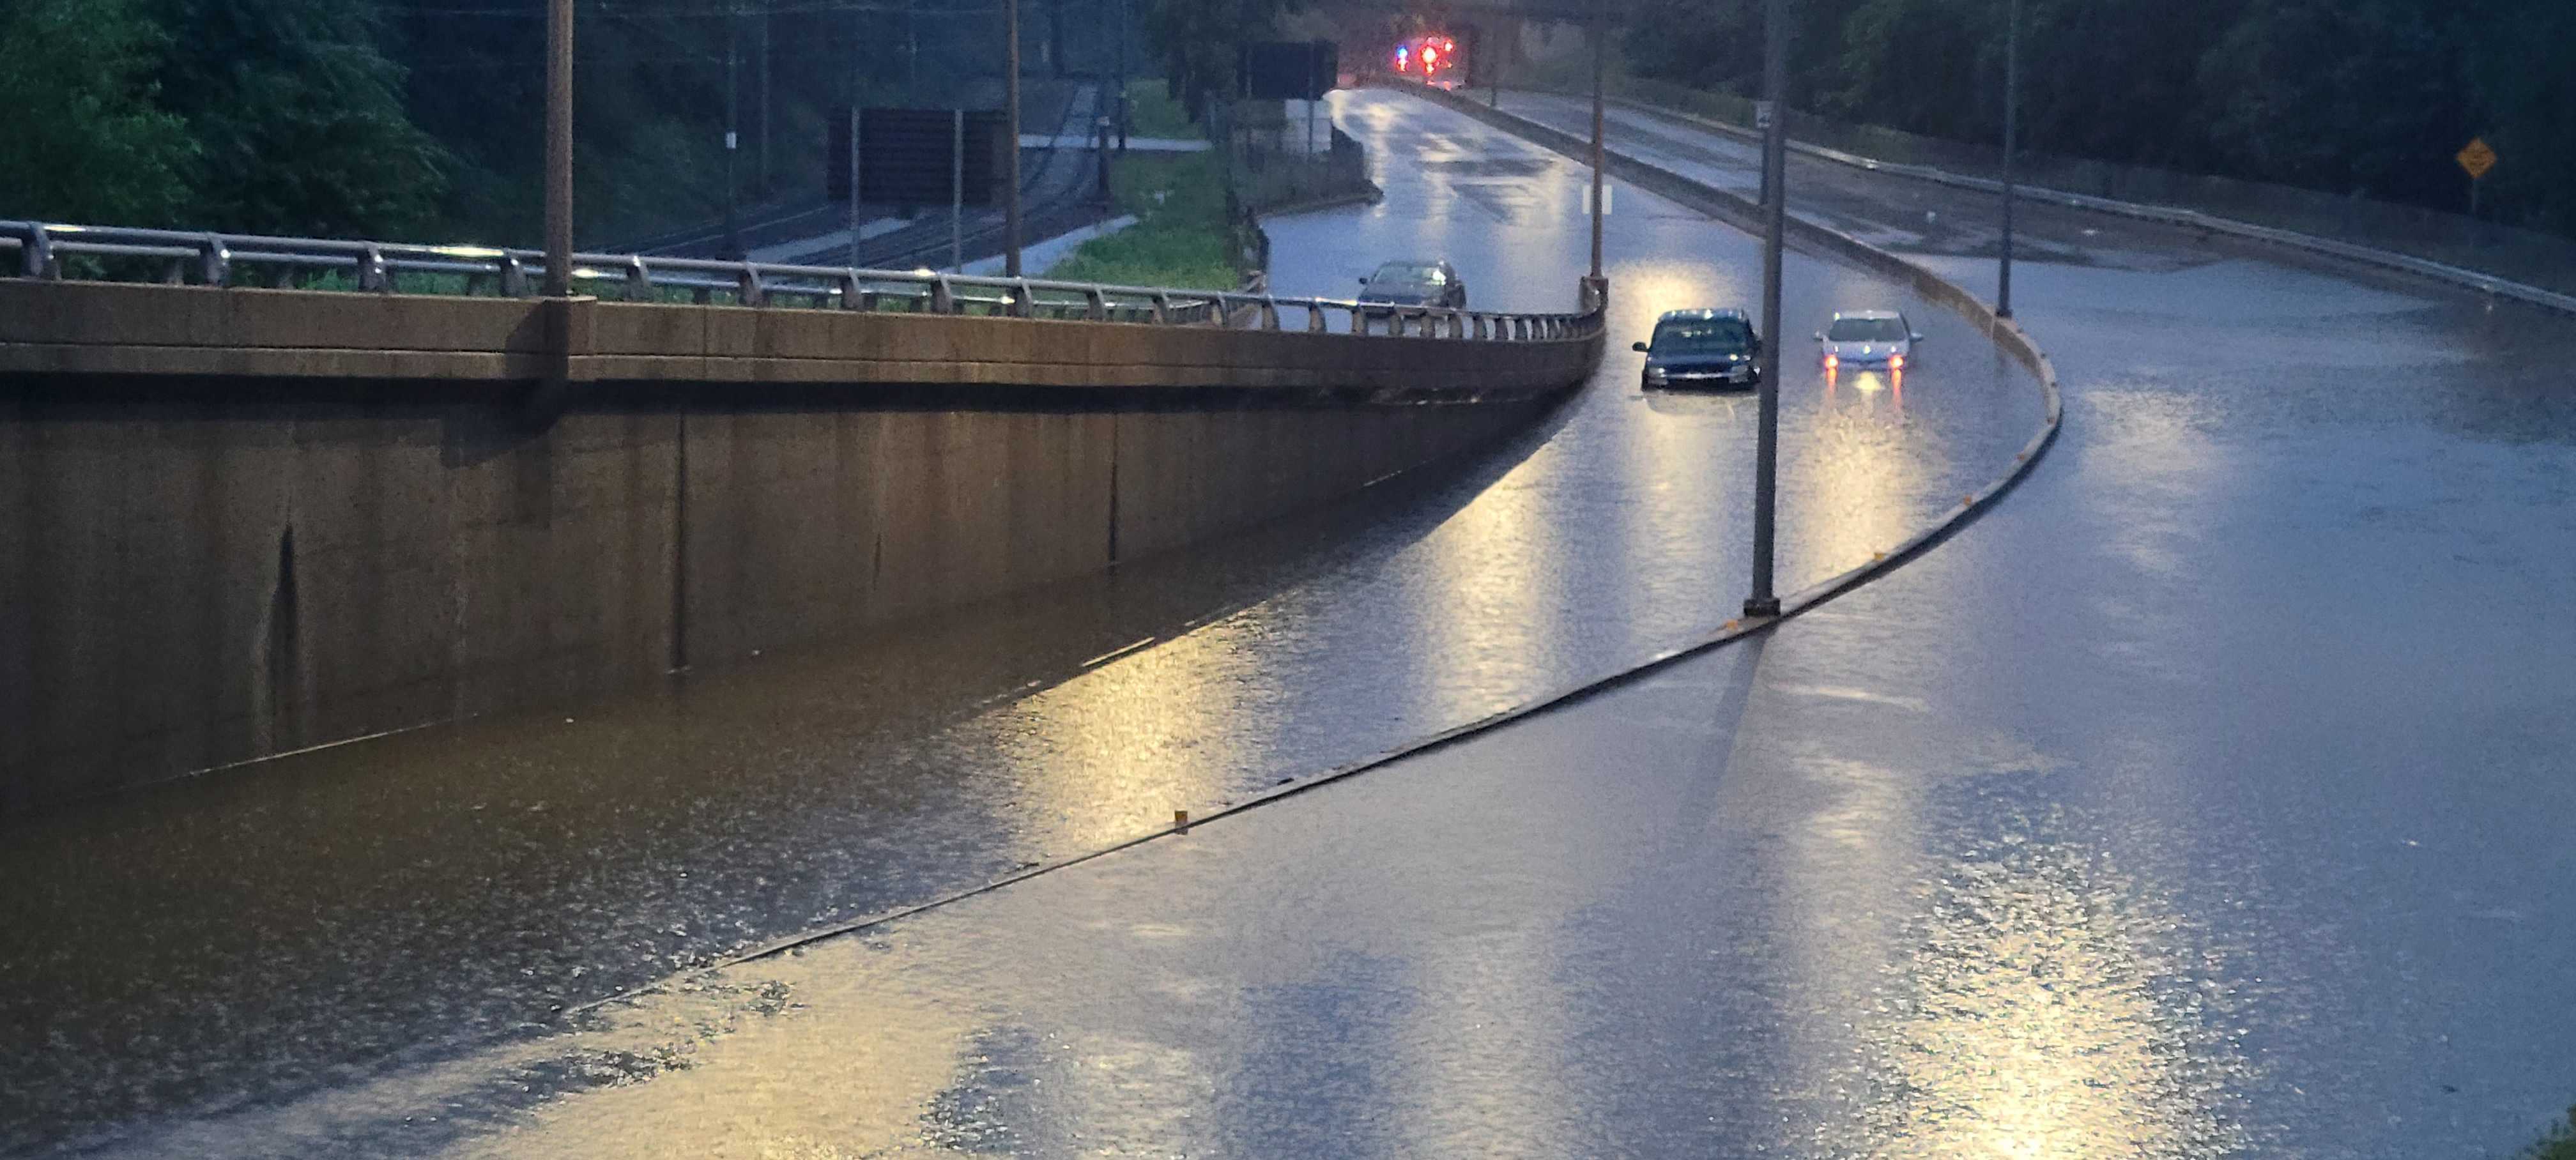 Heavy Rainfall Brings Flooding to St. Louis and Surrounding Area